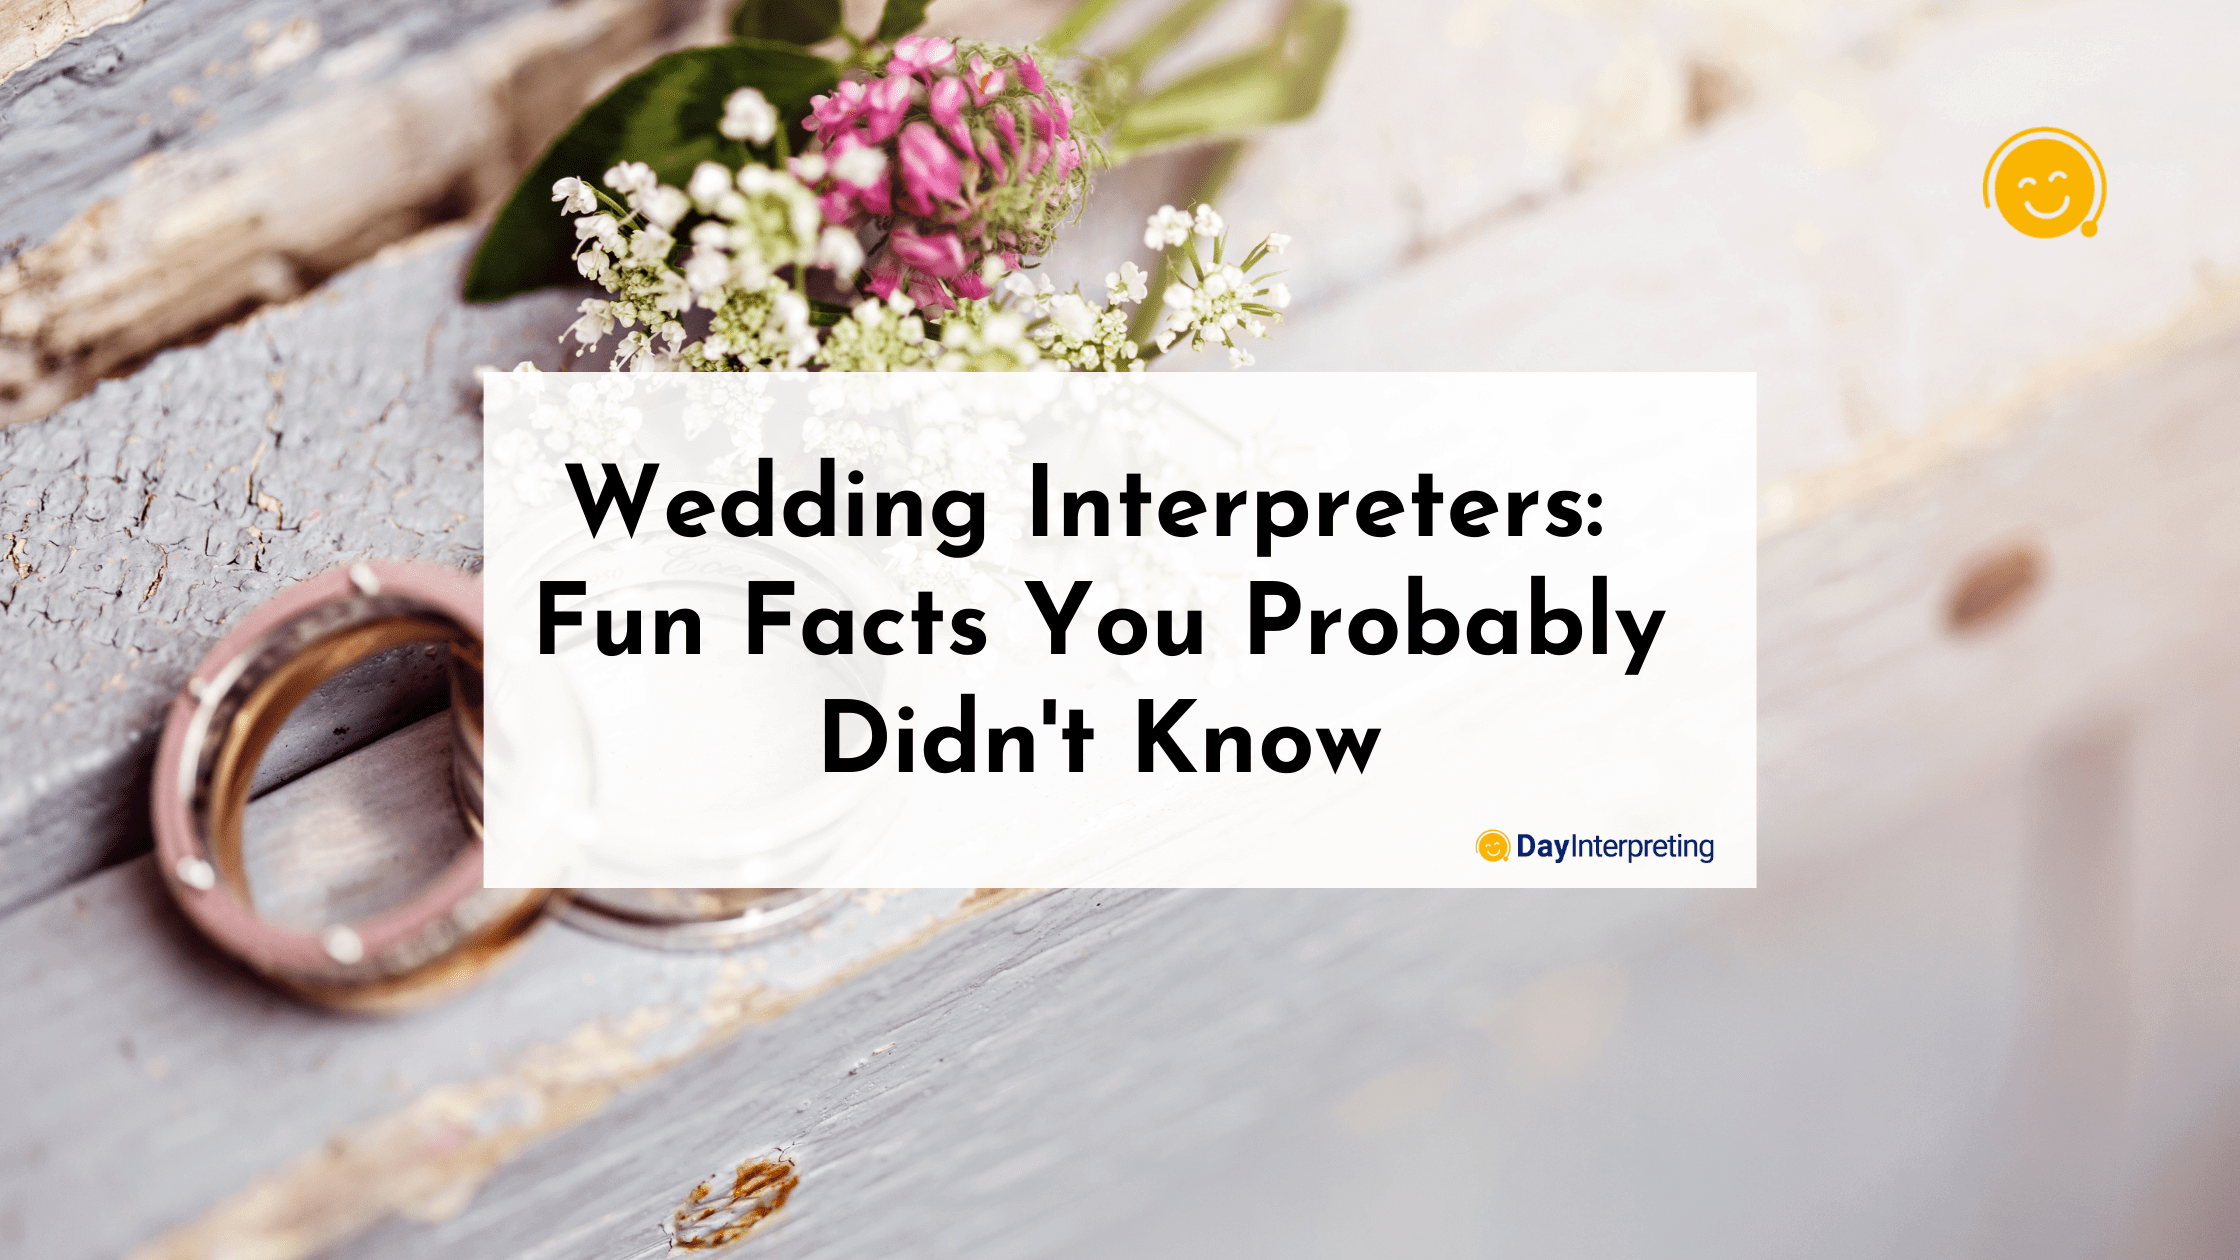 Wedding Interpreters: Fun Facts You Probably Didn’t Know